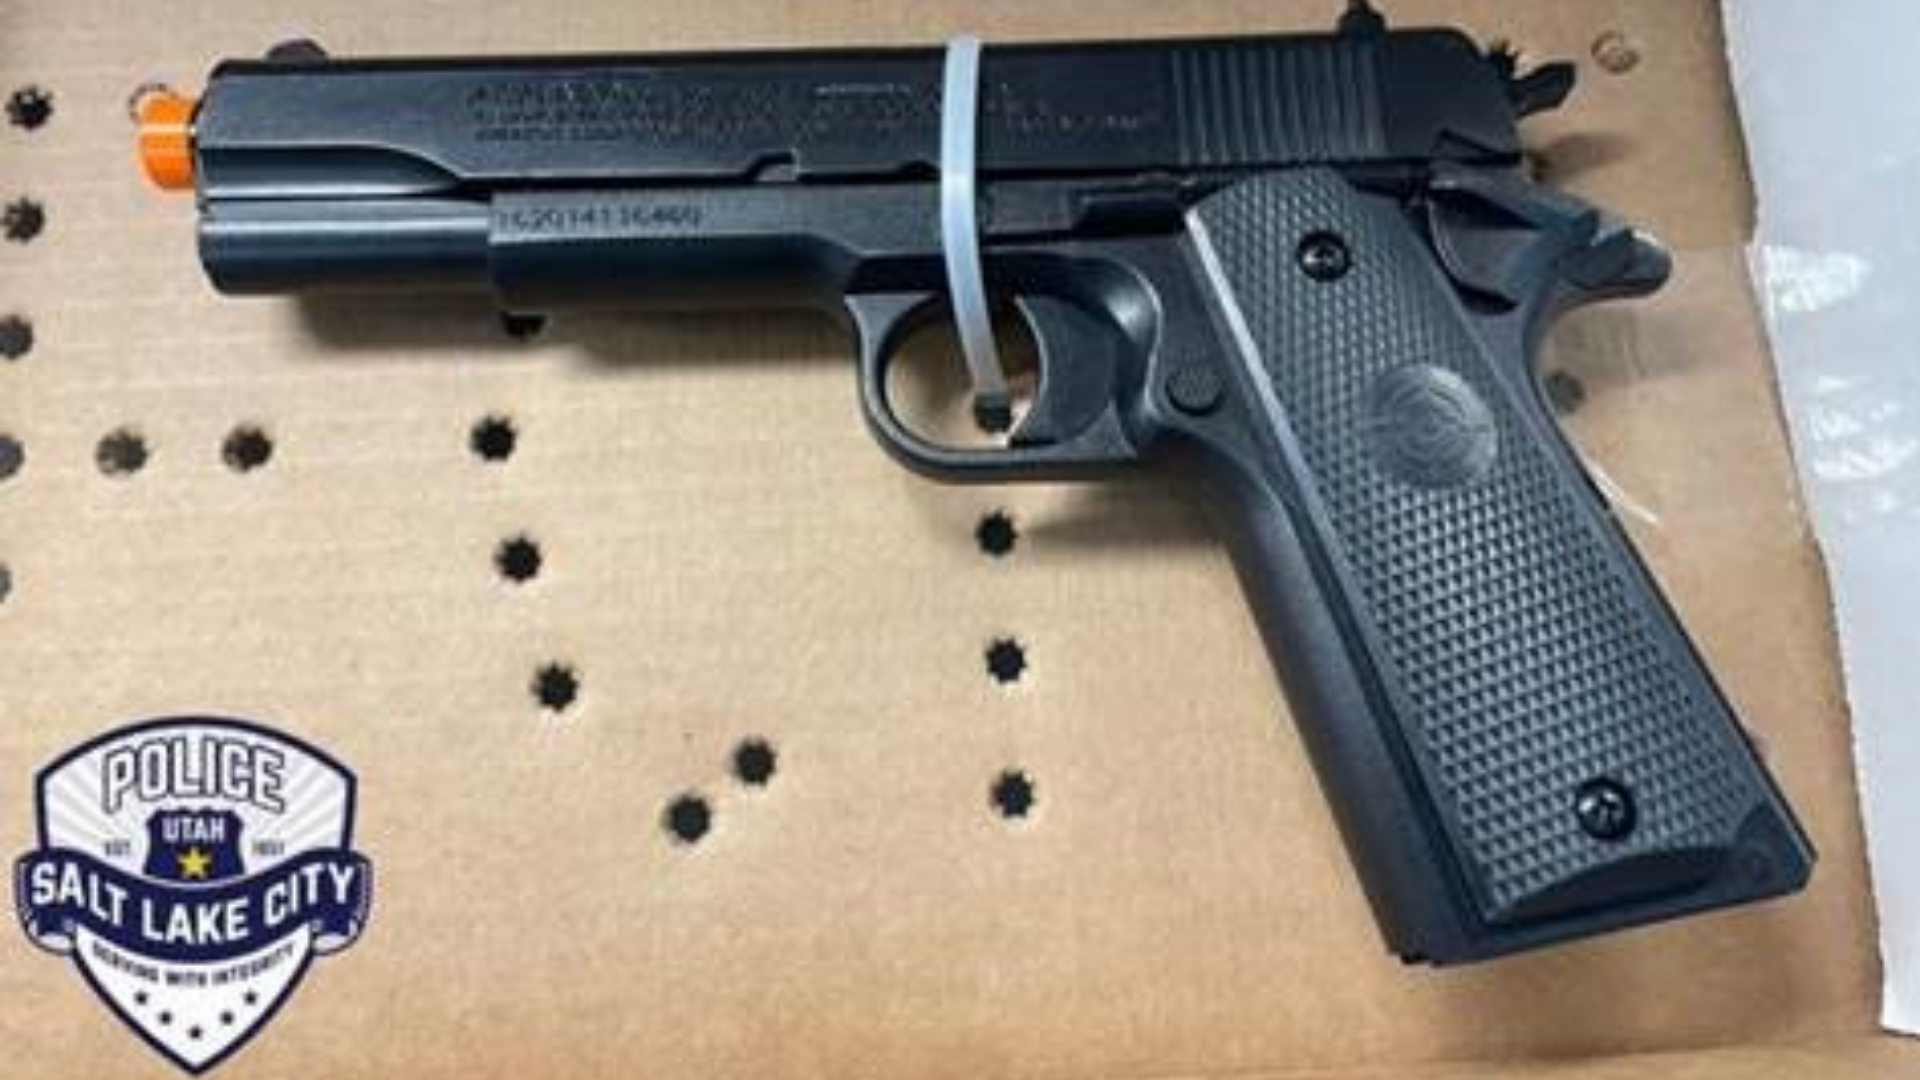 The air gun the detained suspect was using when reported. Photo: Salt Lake City Police Department....